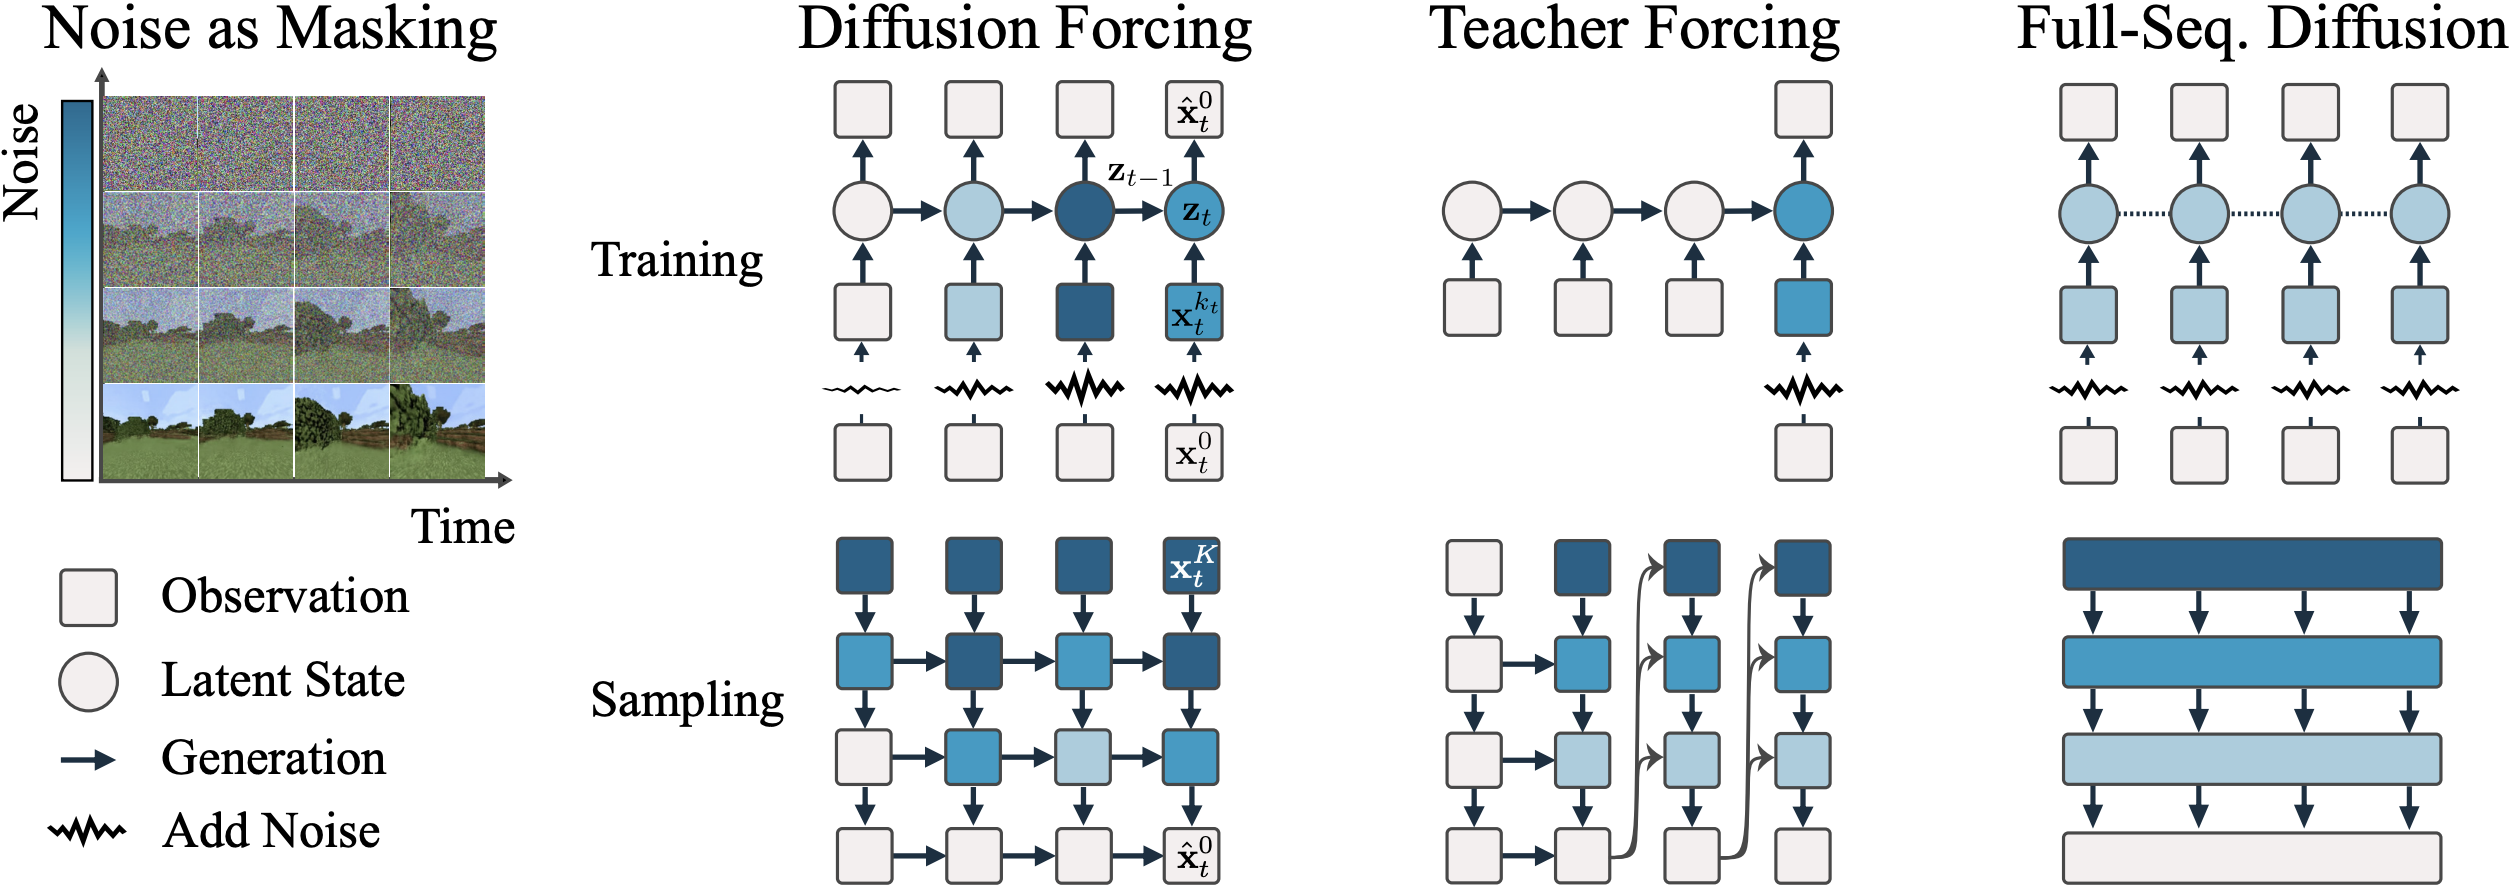 Diffusion Forcing method.